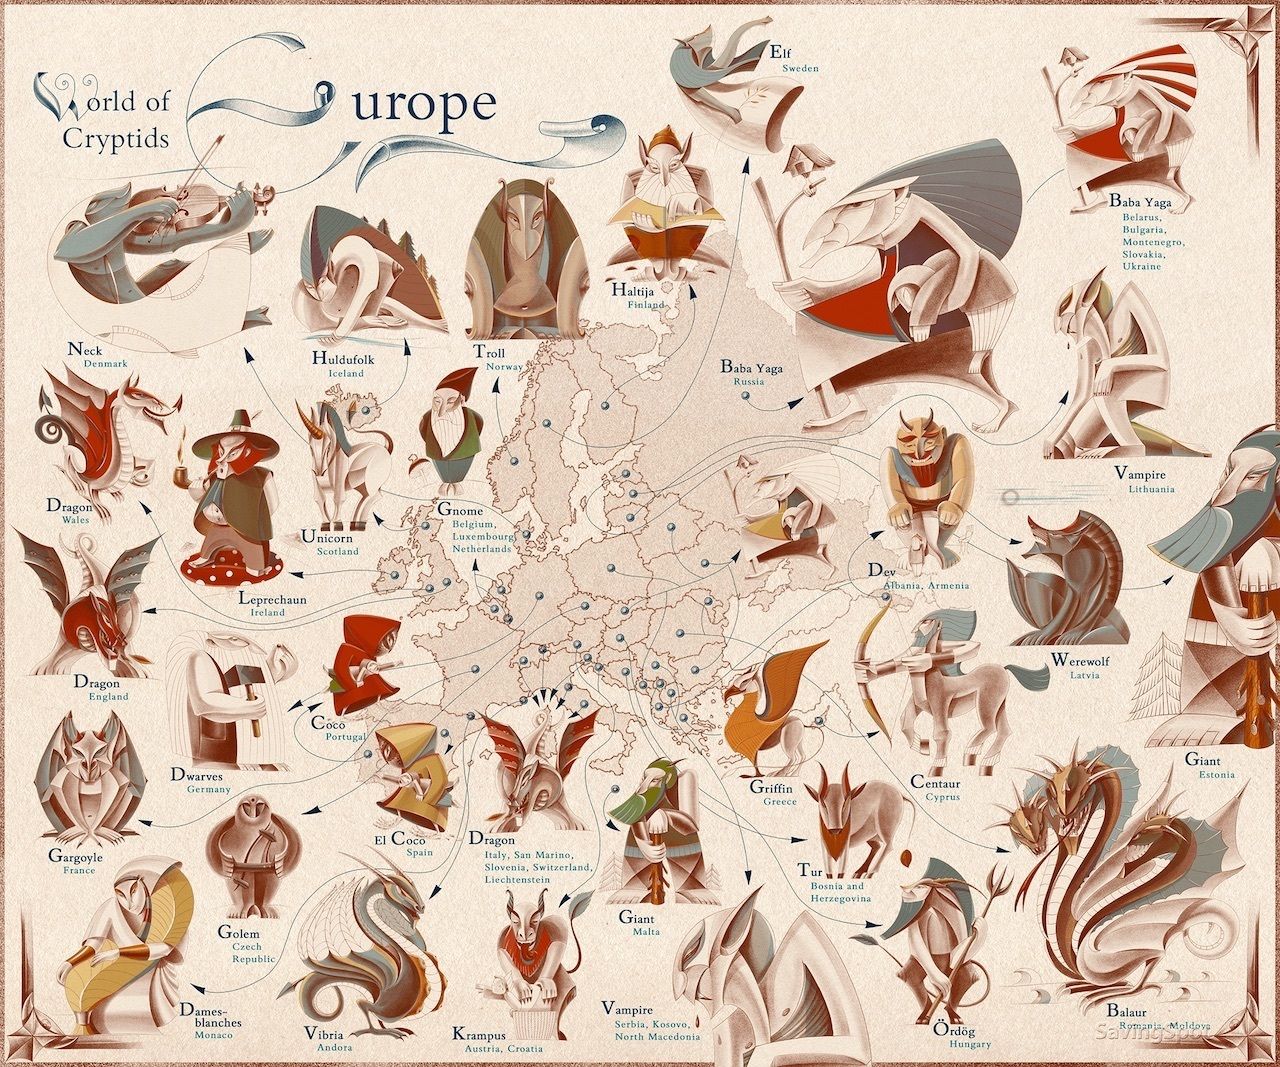 Mythical Creatures of Europe